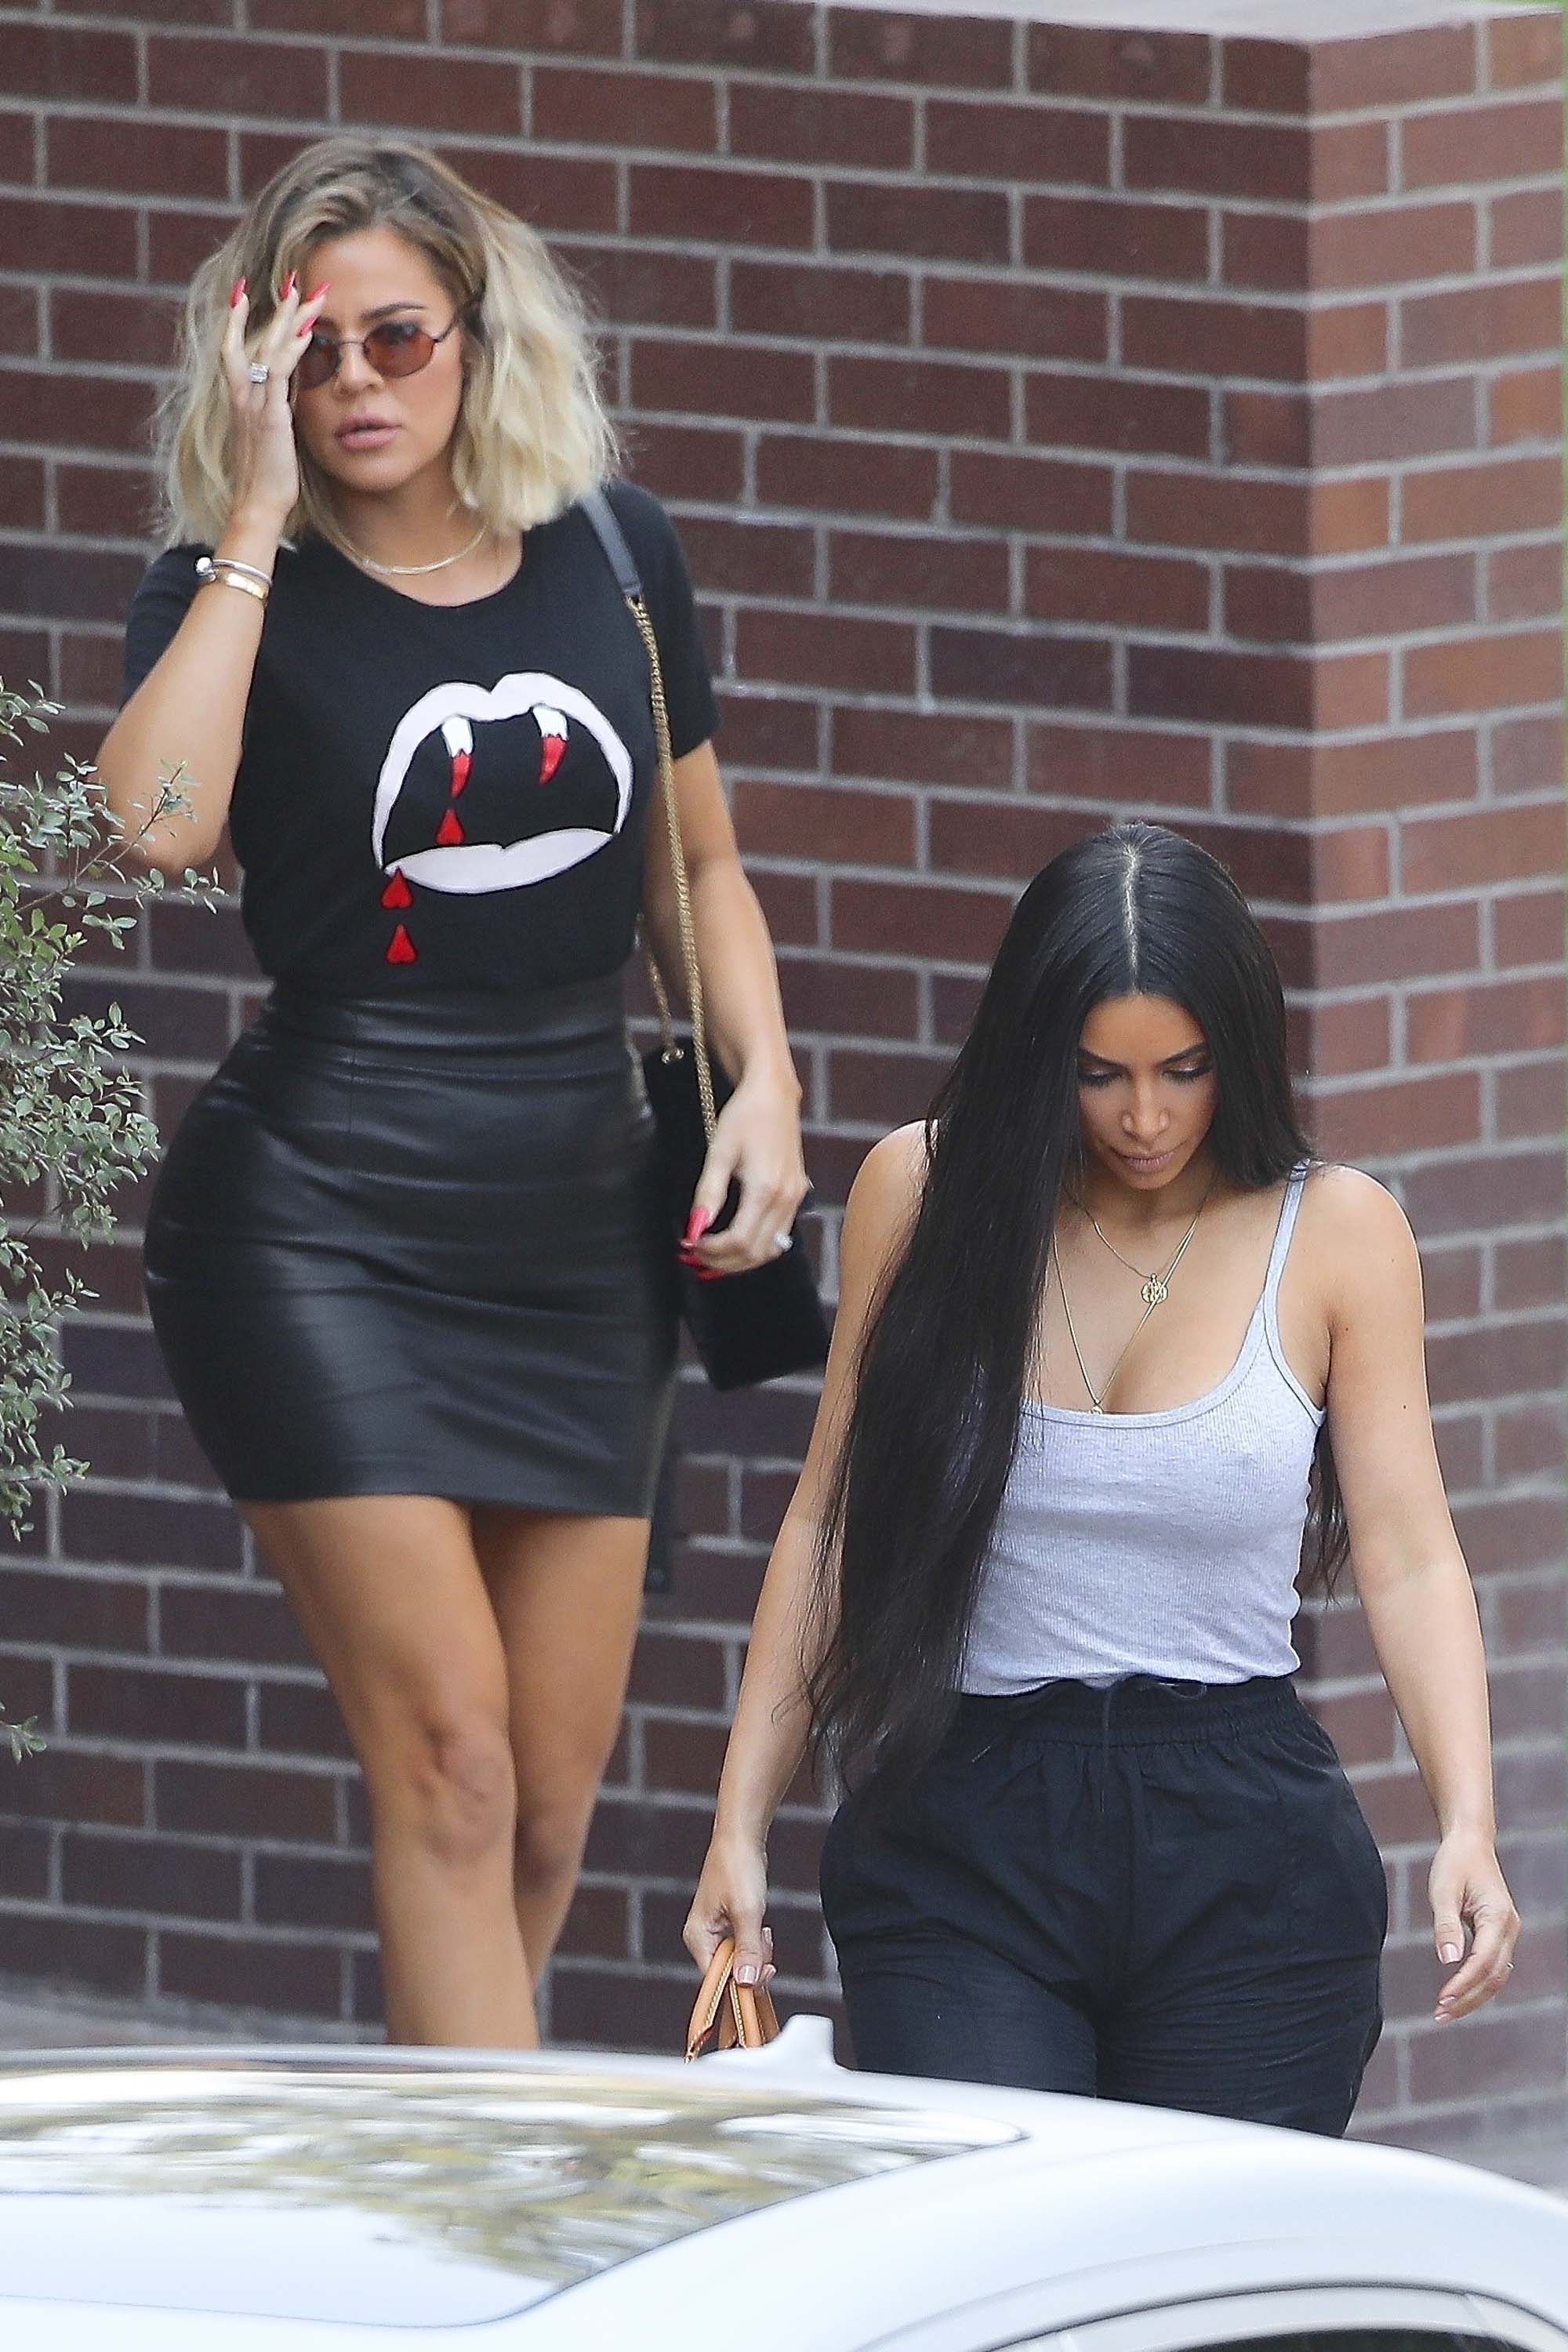 Khloe Kardashian met up for a family lunch